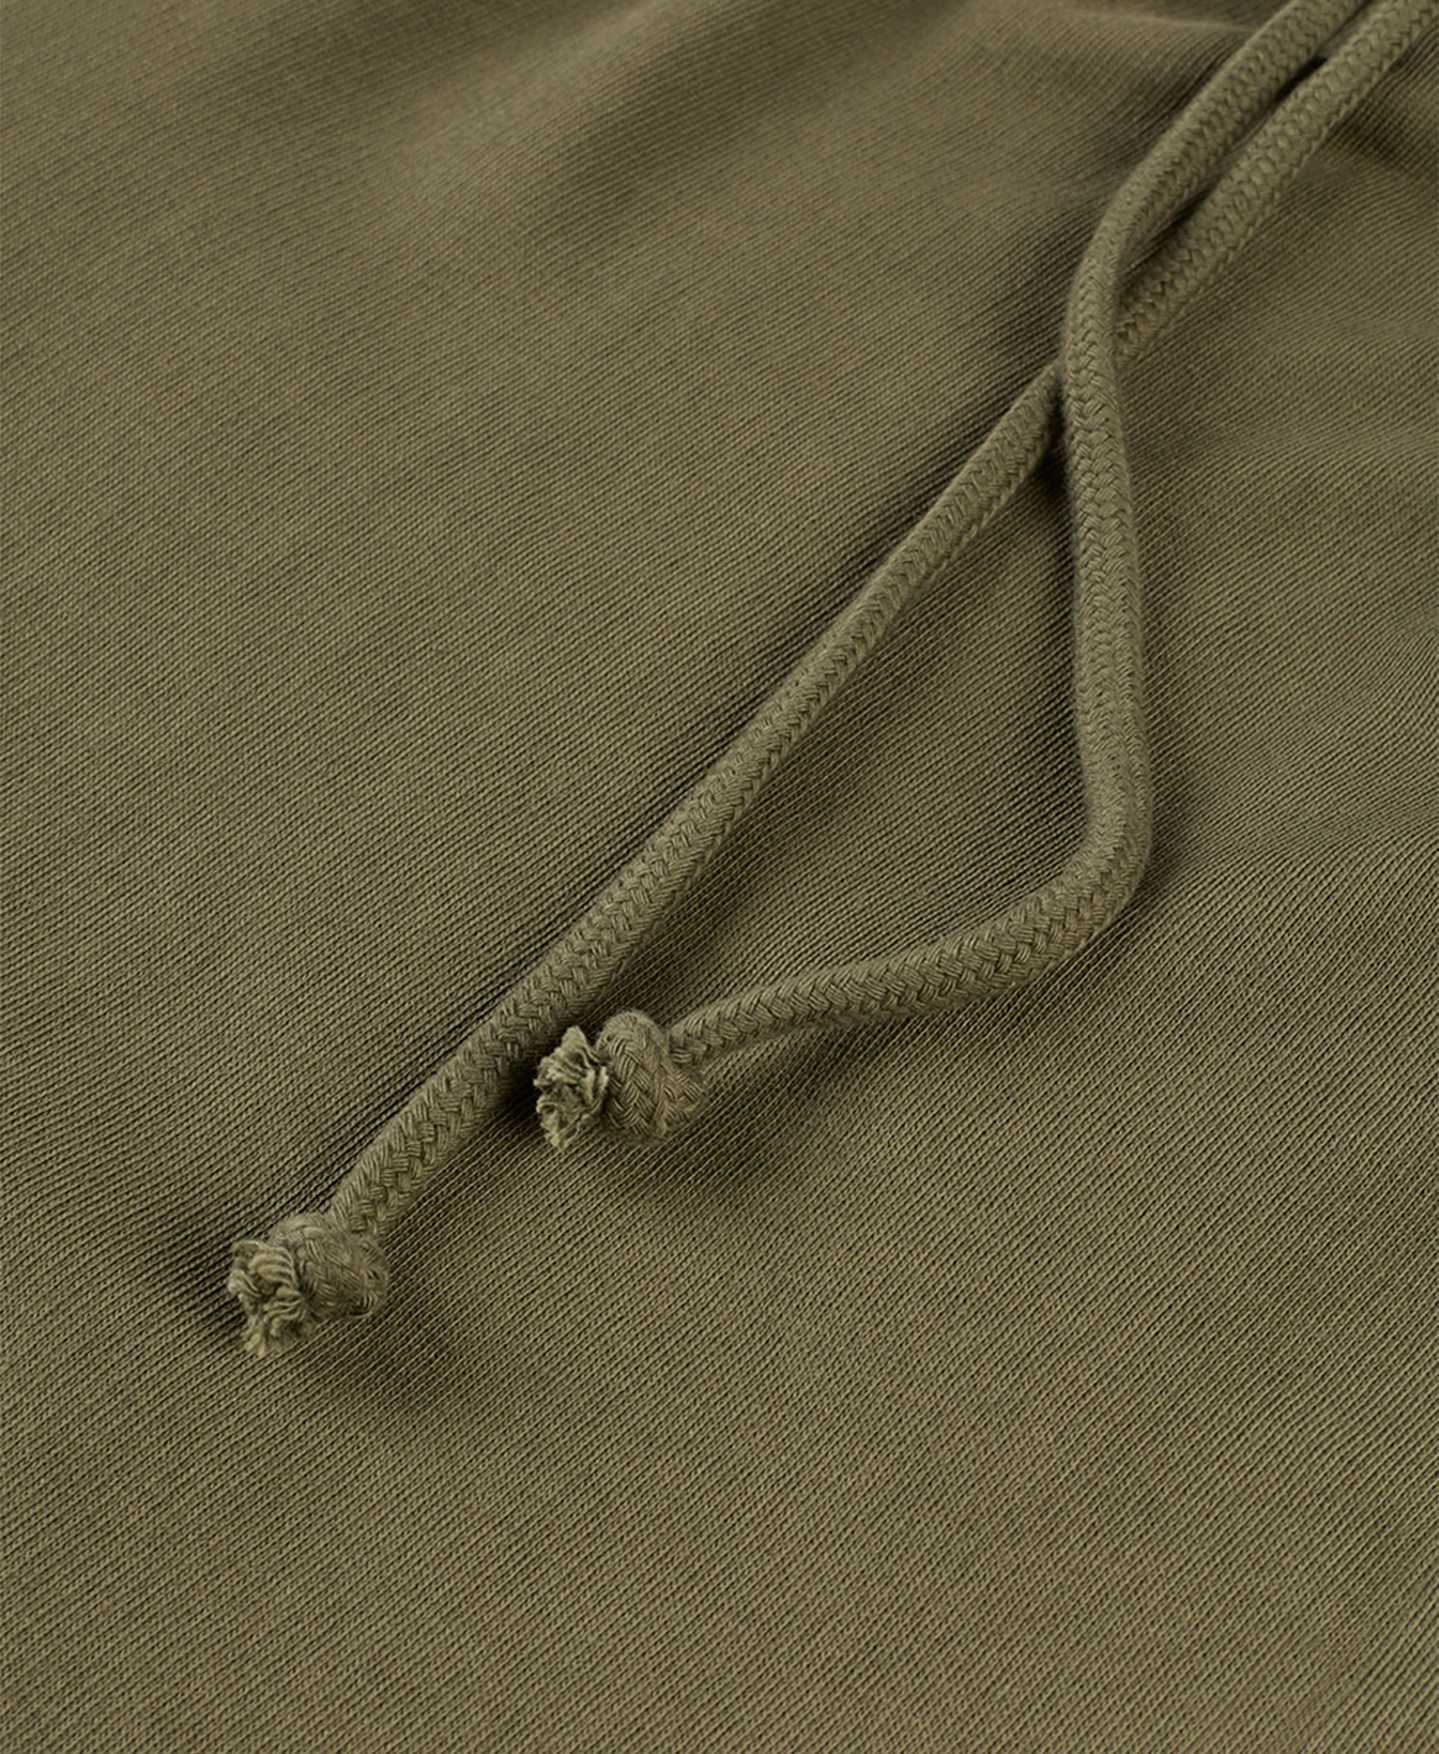 350 GSM 'Army Olive' Short Pants